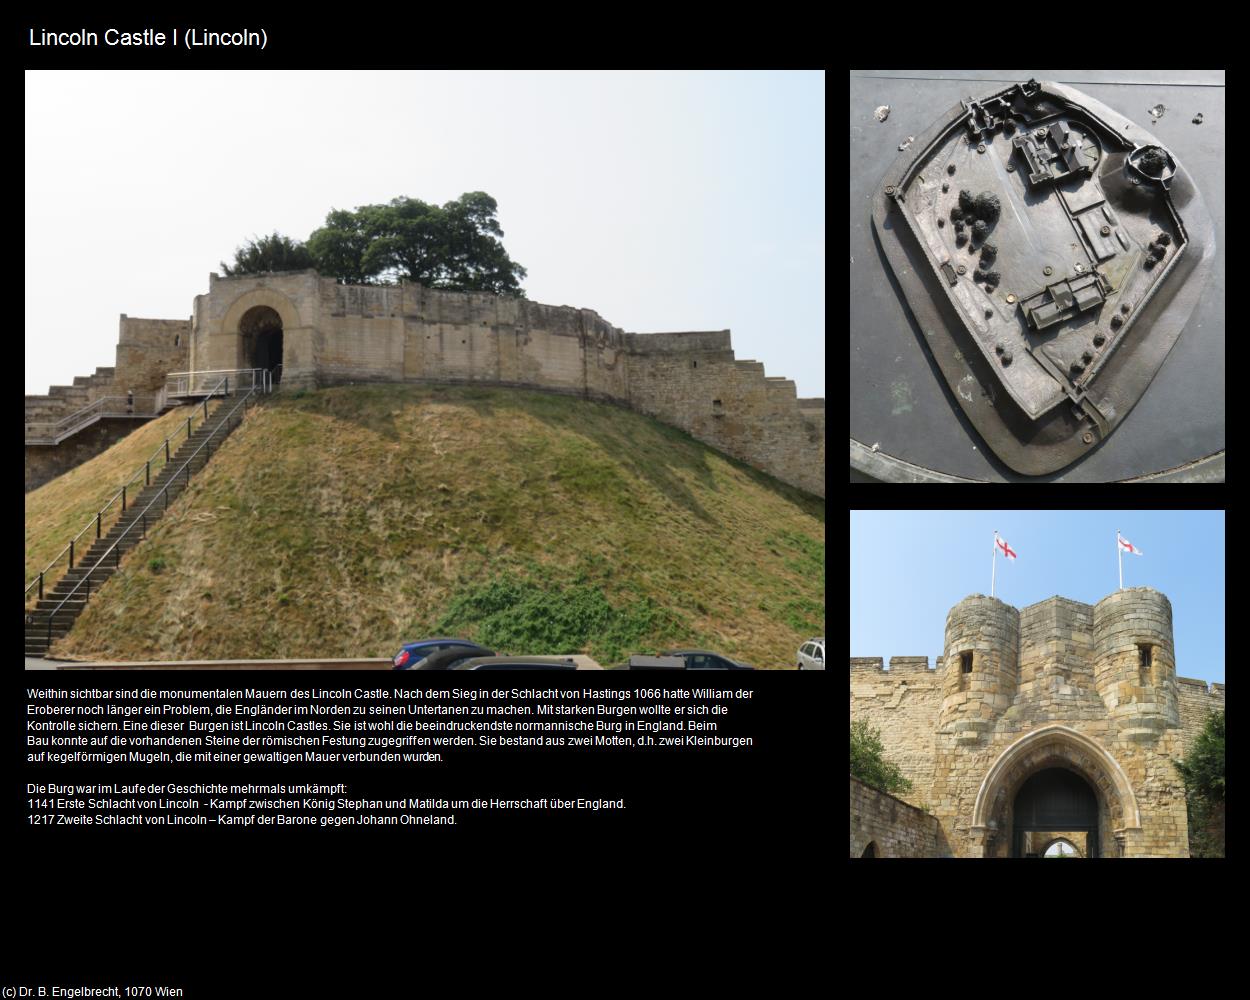 Lincoln Castle I  (Lincoln, England) in Kulturatlas-ENGLAND und WALES